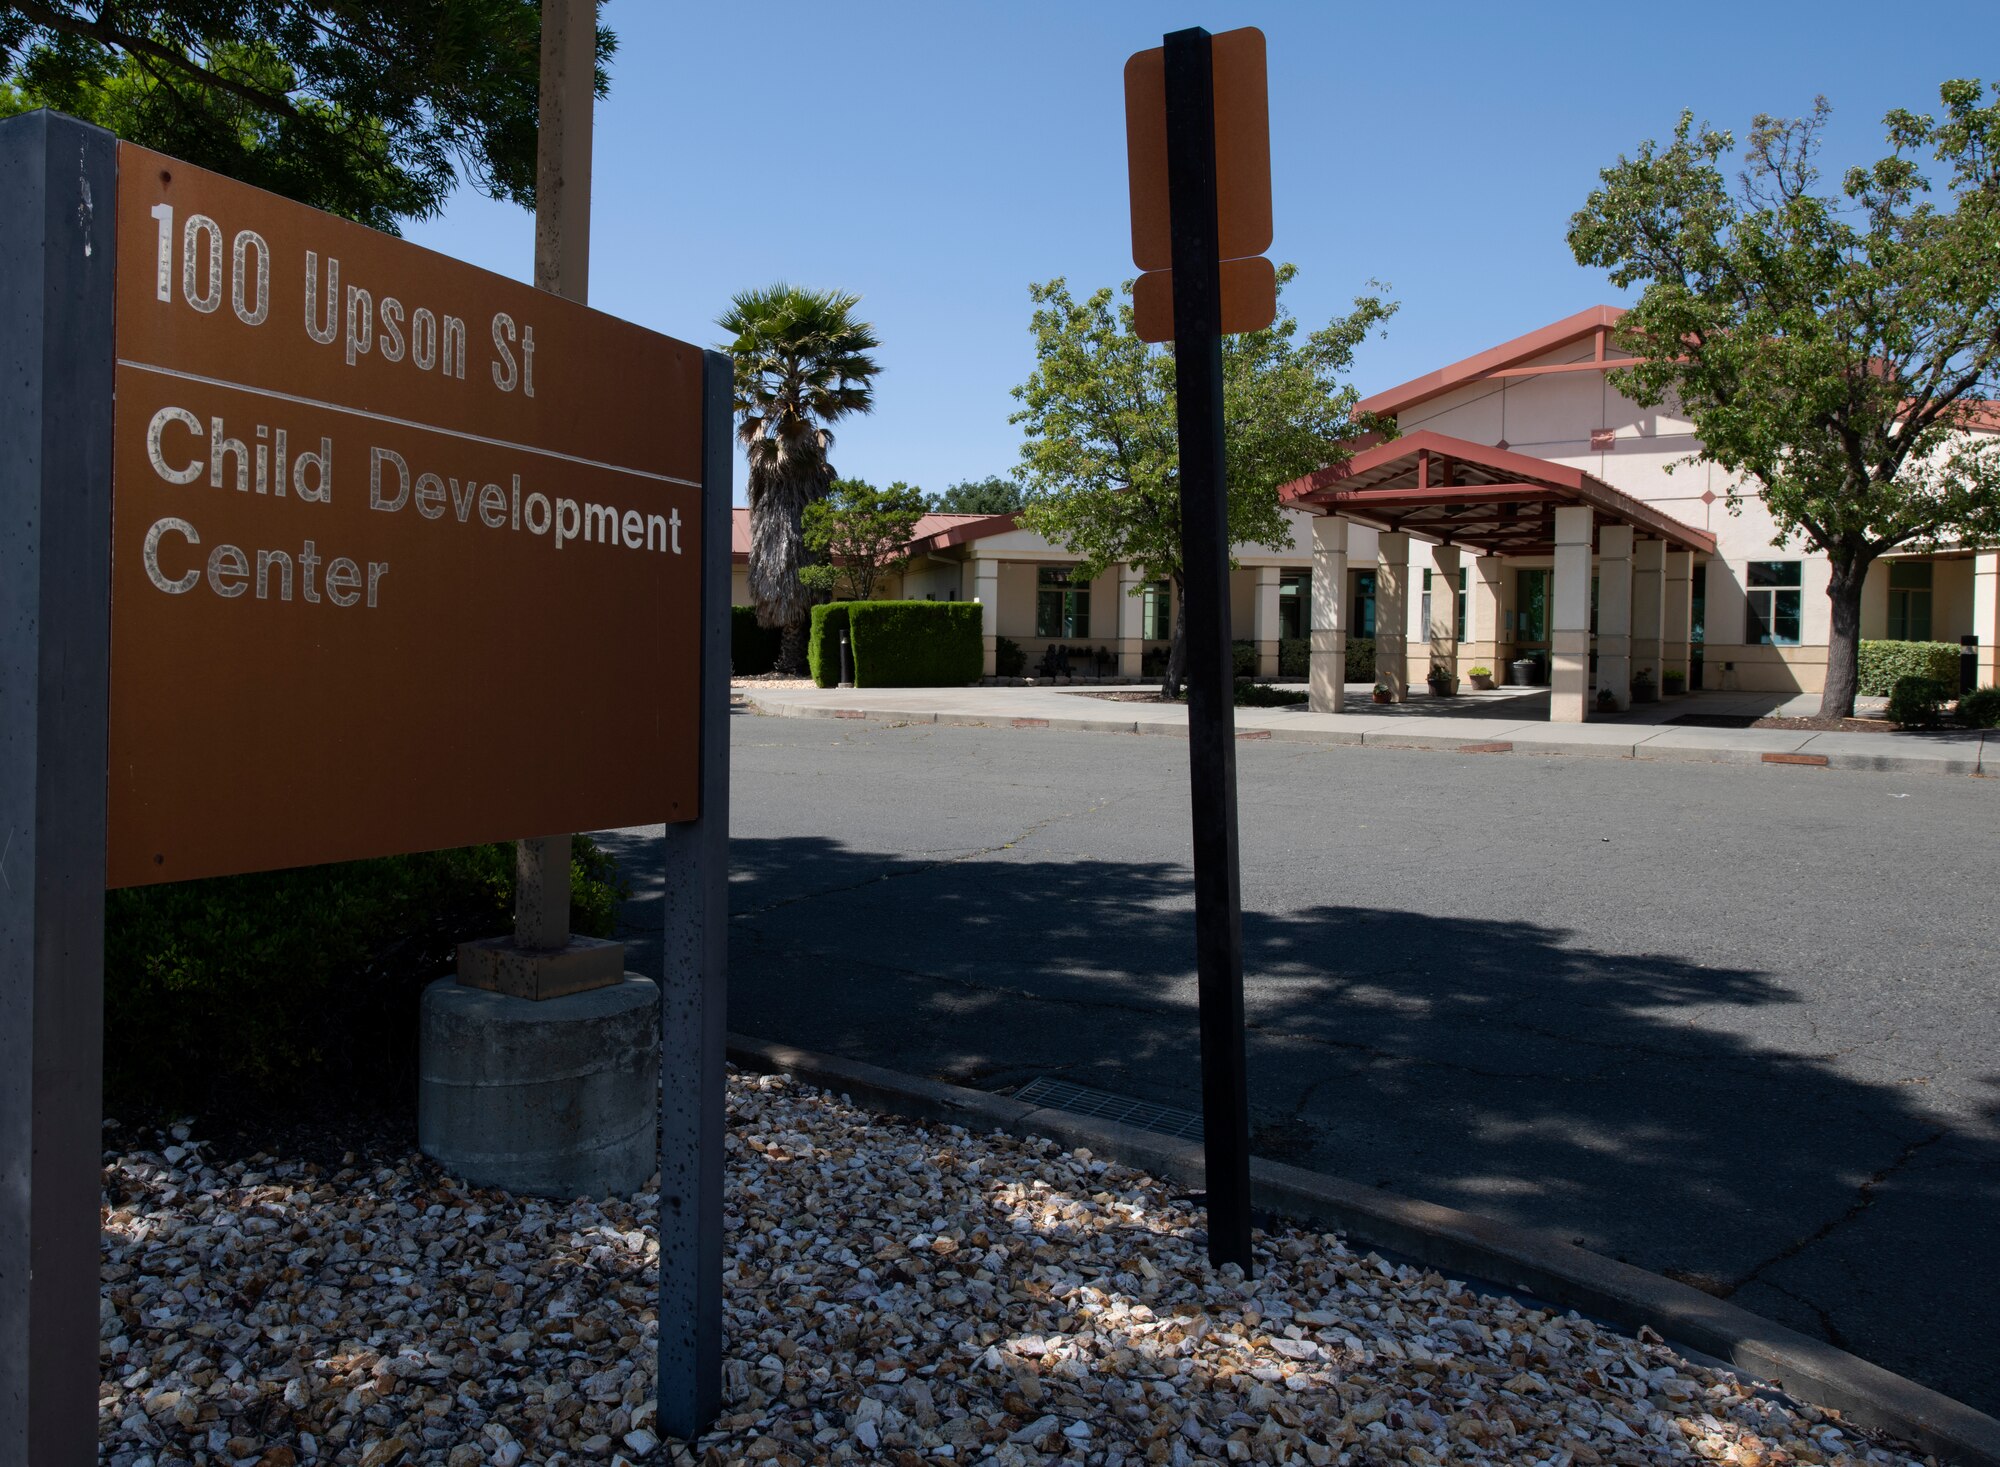 Child Development Center 3 is open May 1, 2020, at Travis Air Force Base, California. The center is one of three childcare centers at Travis AFB that provides care for children from six weeks to 5-years-old. (U.S. Air Force photo by Tech. Sgt. James Hodgman)